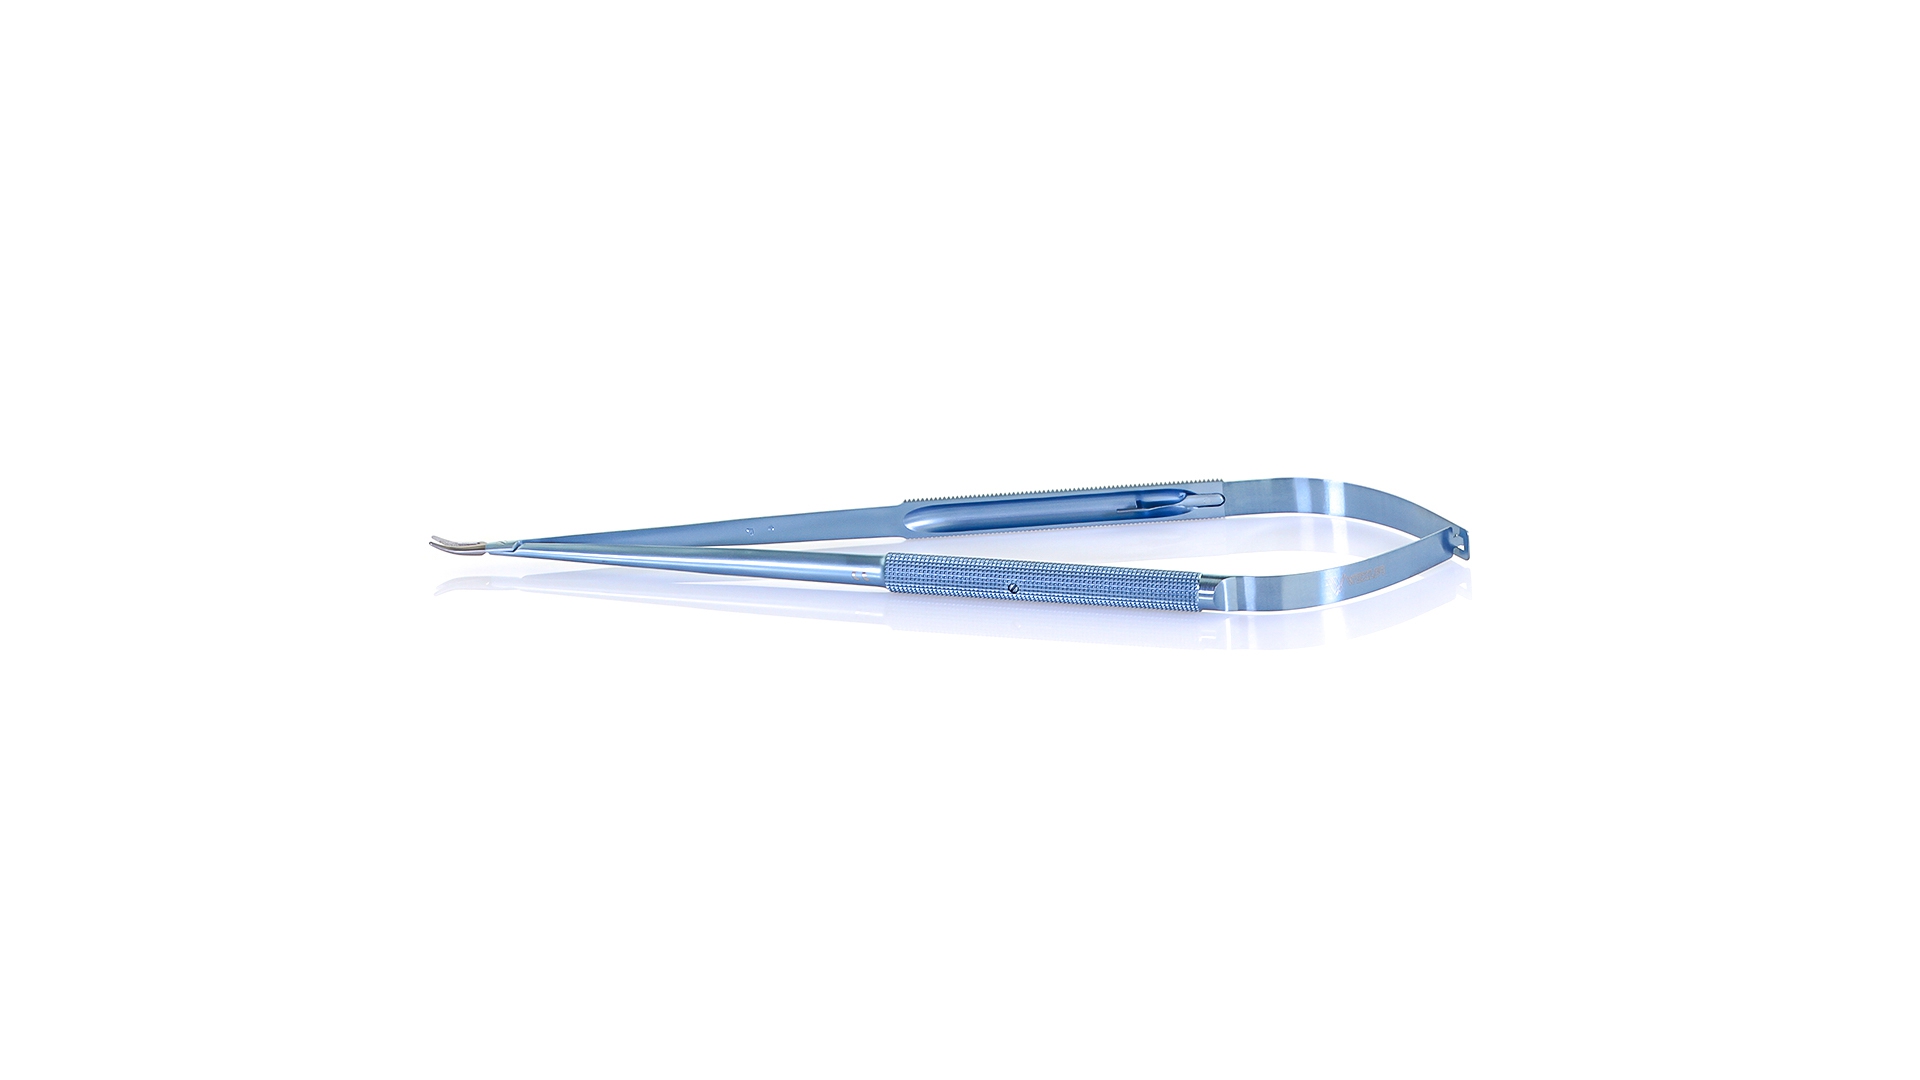 Jacobson Micro Needle Holder - Curved TC coated jaws